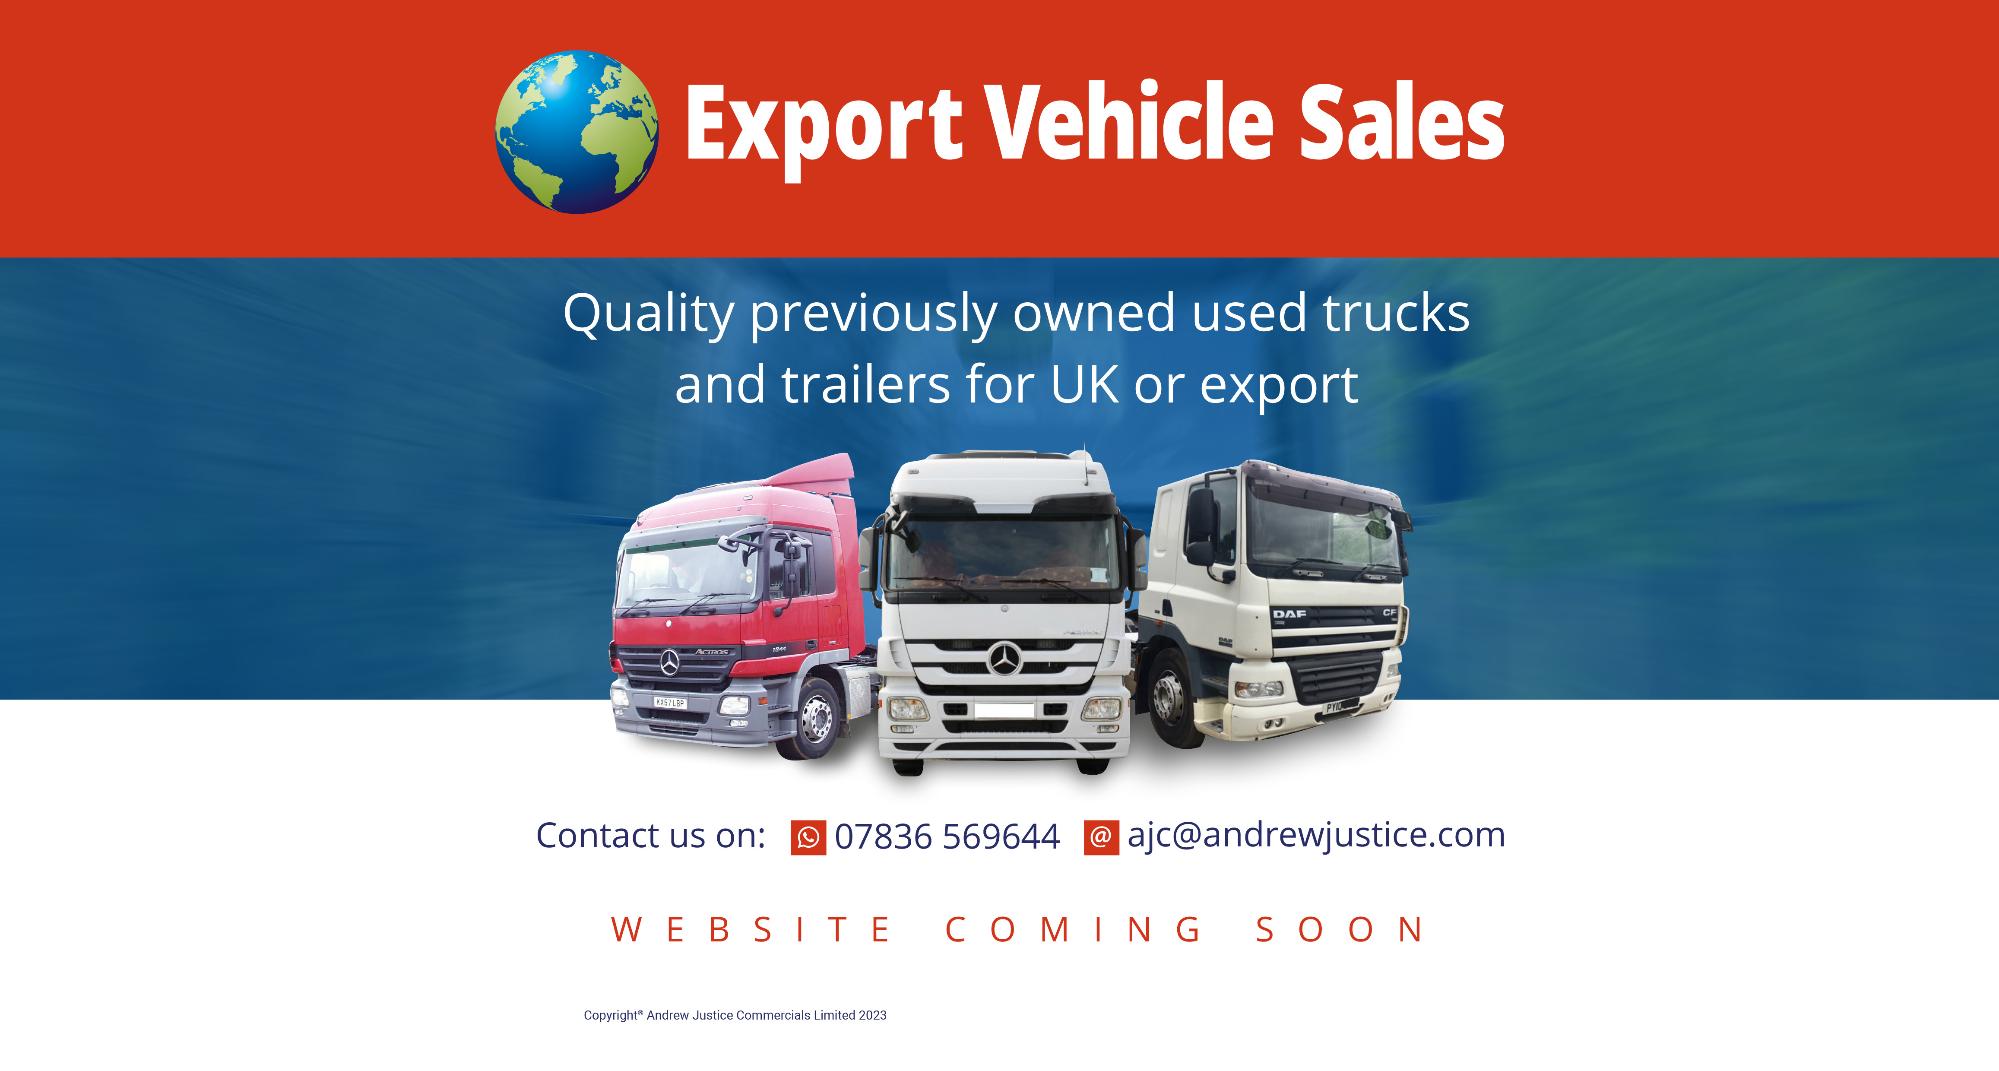 Export Vehicle Sales - Quality previously owned used trucks and trailers for UK or export. Contact us on 0783656944 or ajc@andrewjustice.com. Website coming soon